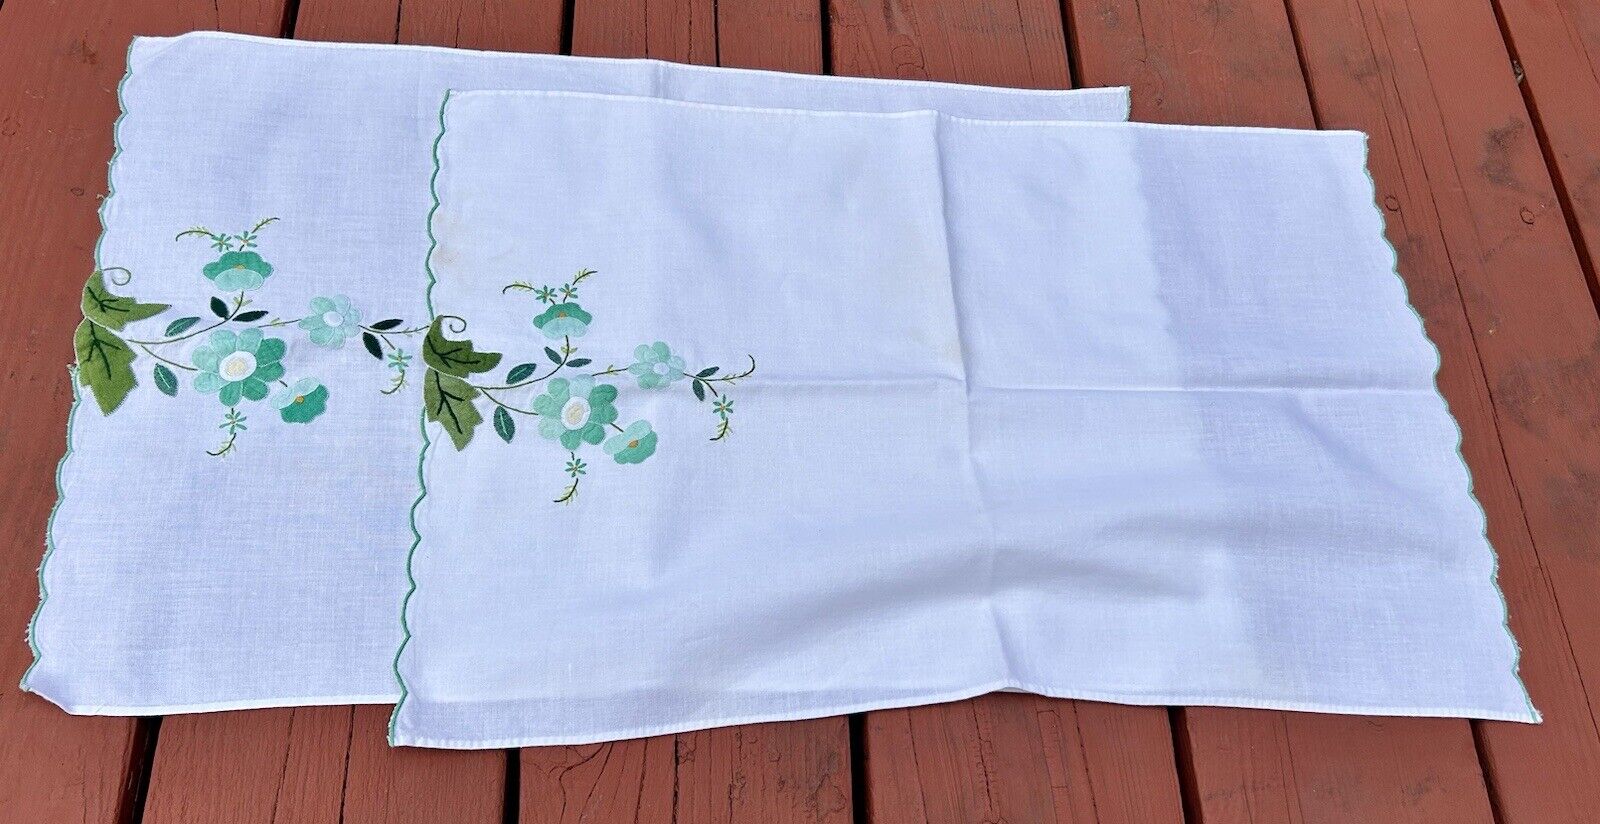 Vintage pair of embroidered placemats